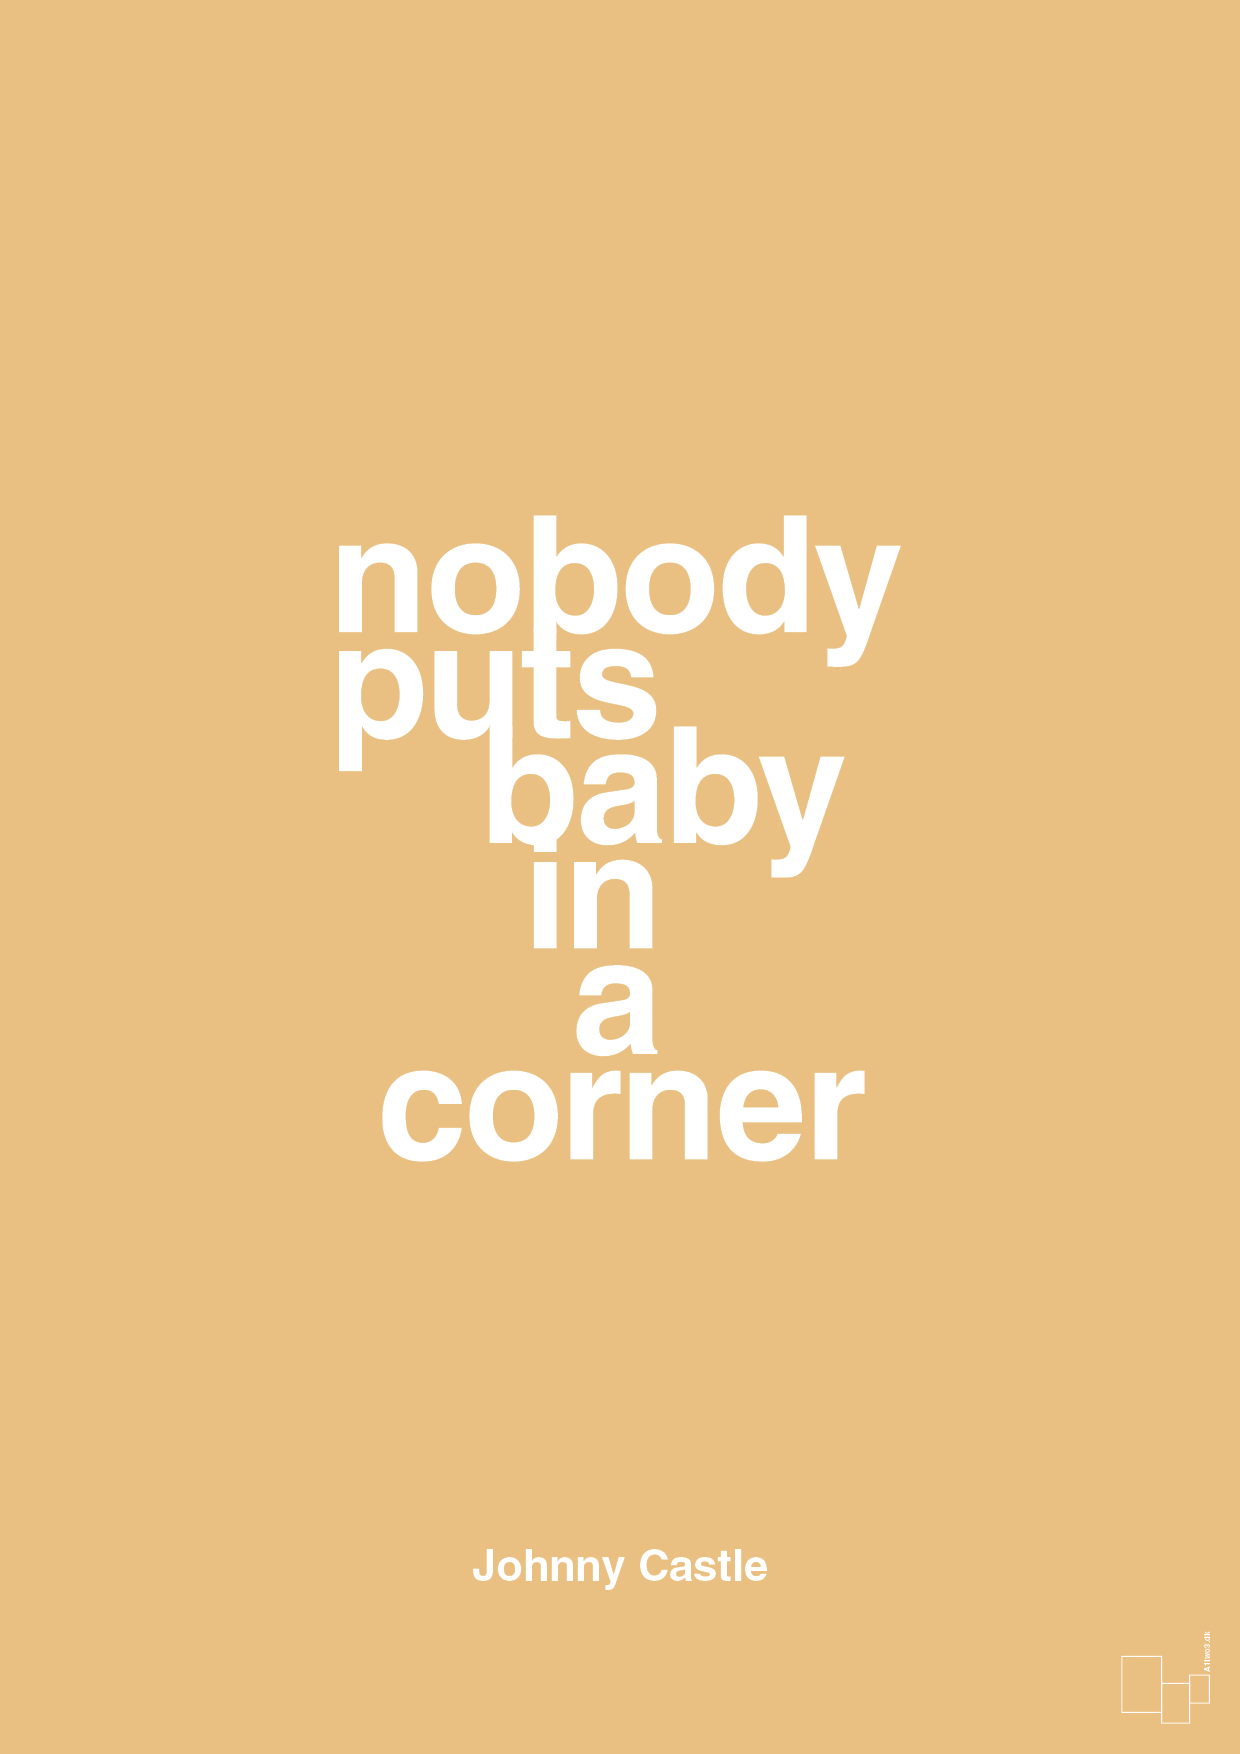 nobody puts baby in a corner - Plakat med Citater i Charismatic